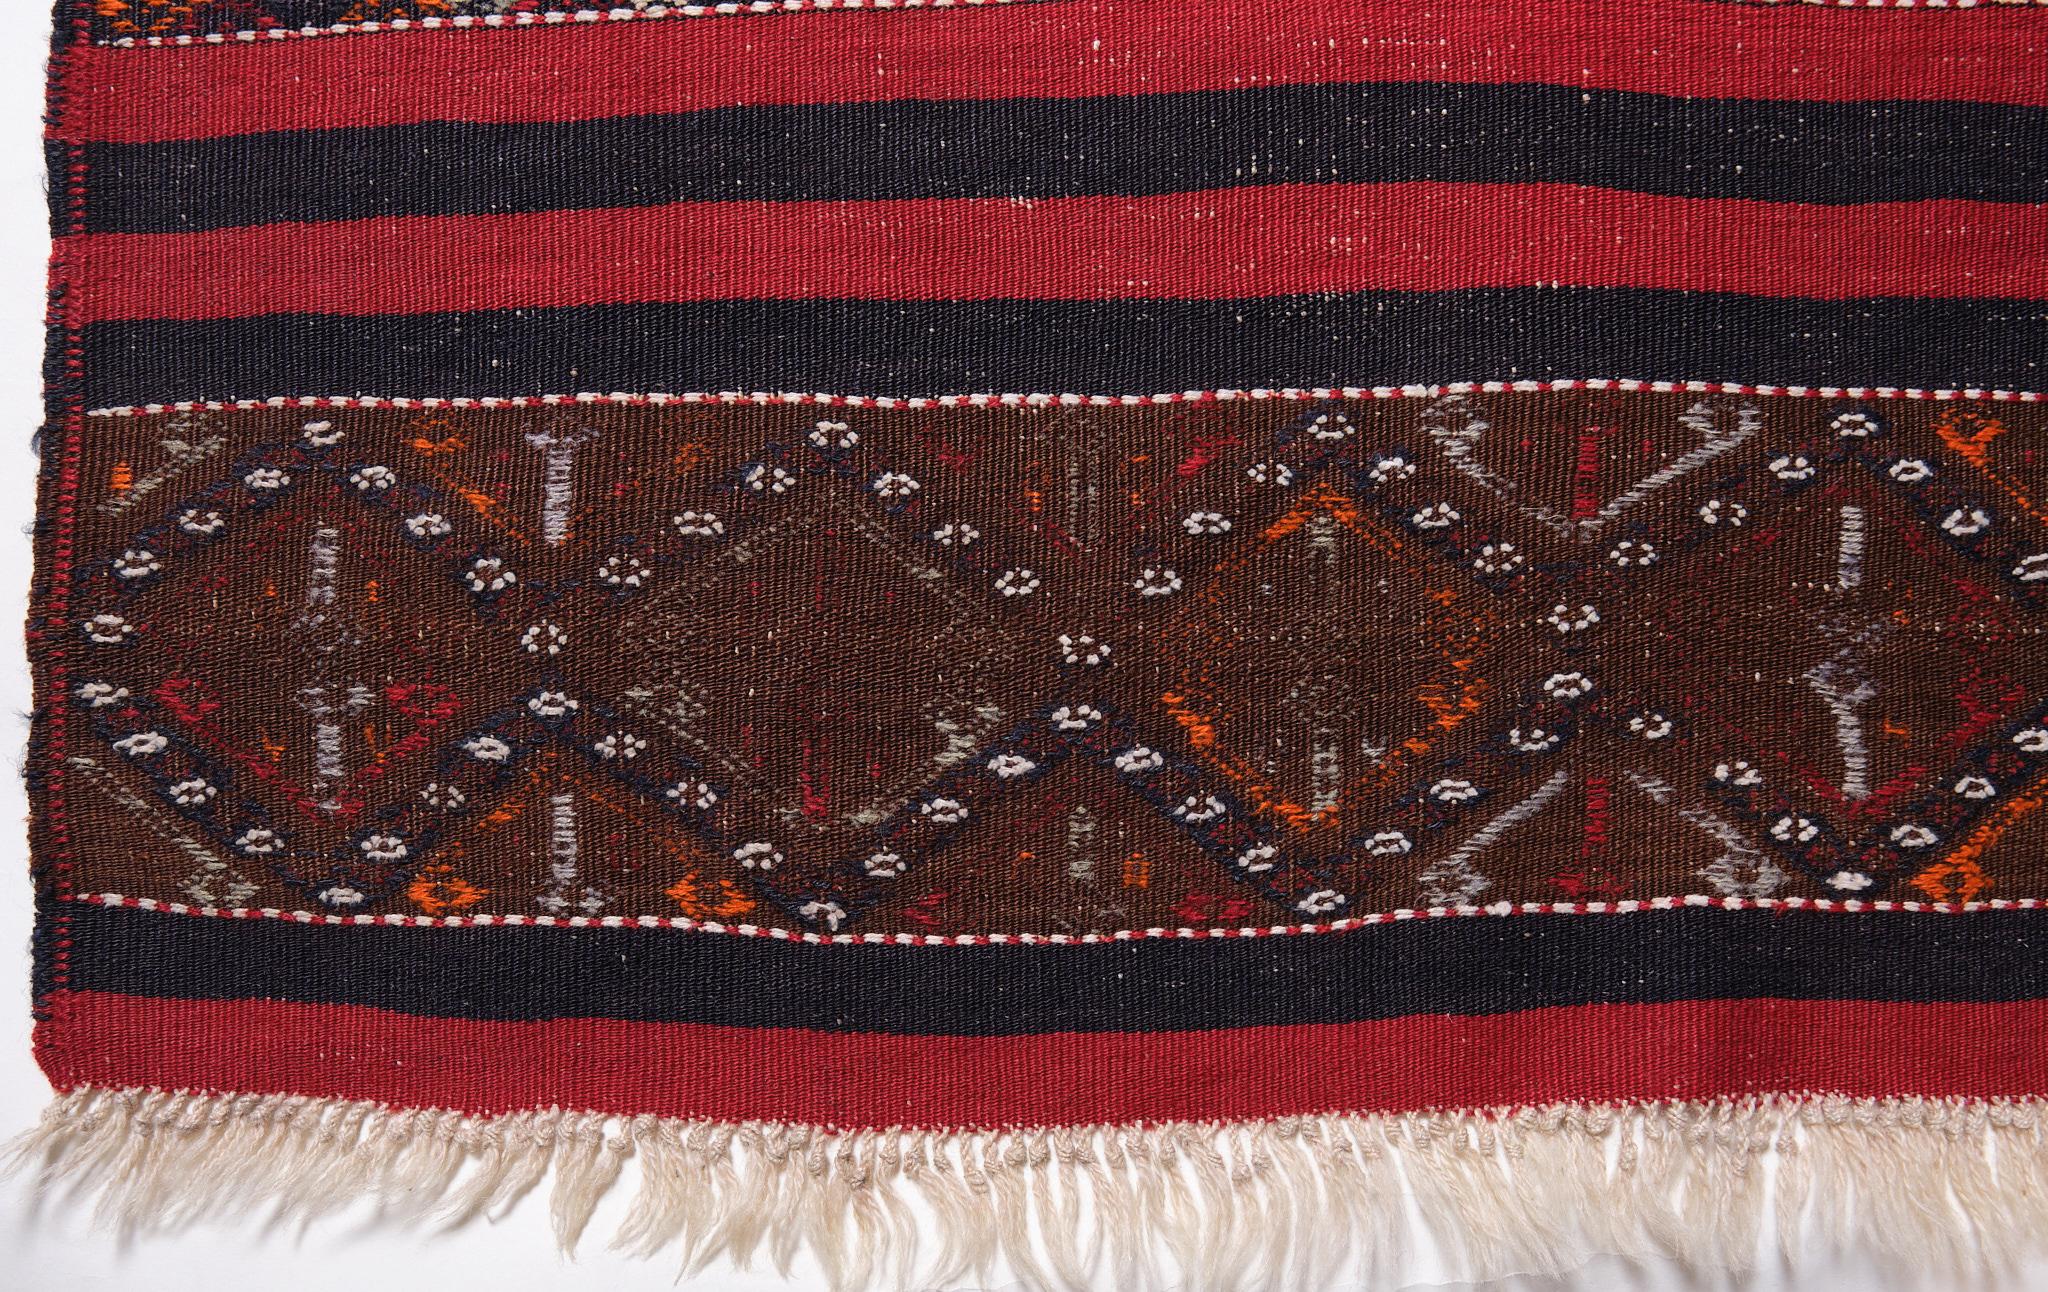 This is a South Eastern Anatolian Old Jijim (Cecim, Cicim) Kilim from the Maras region with a rare and beautiful color composition.